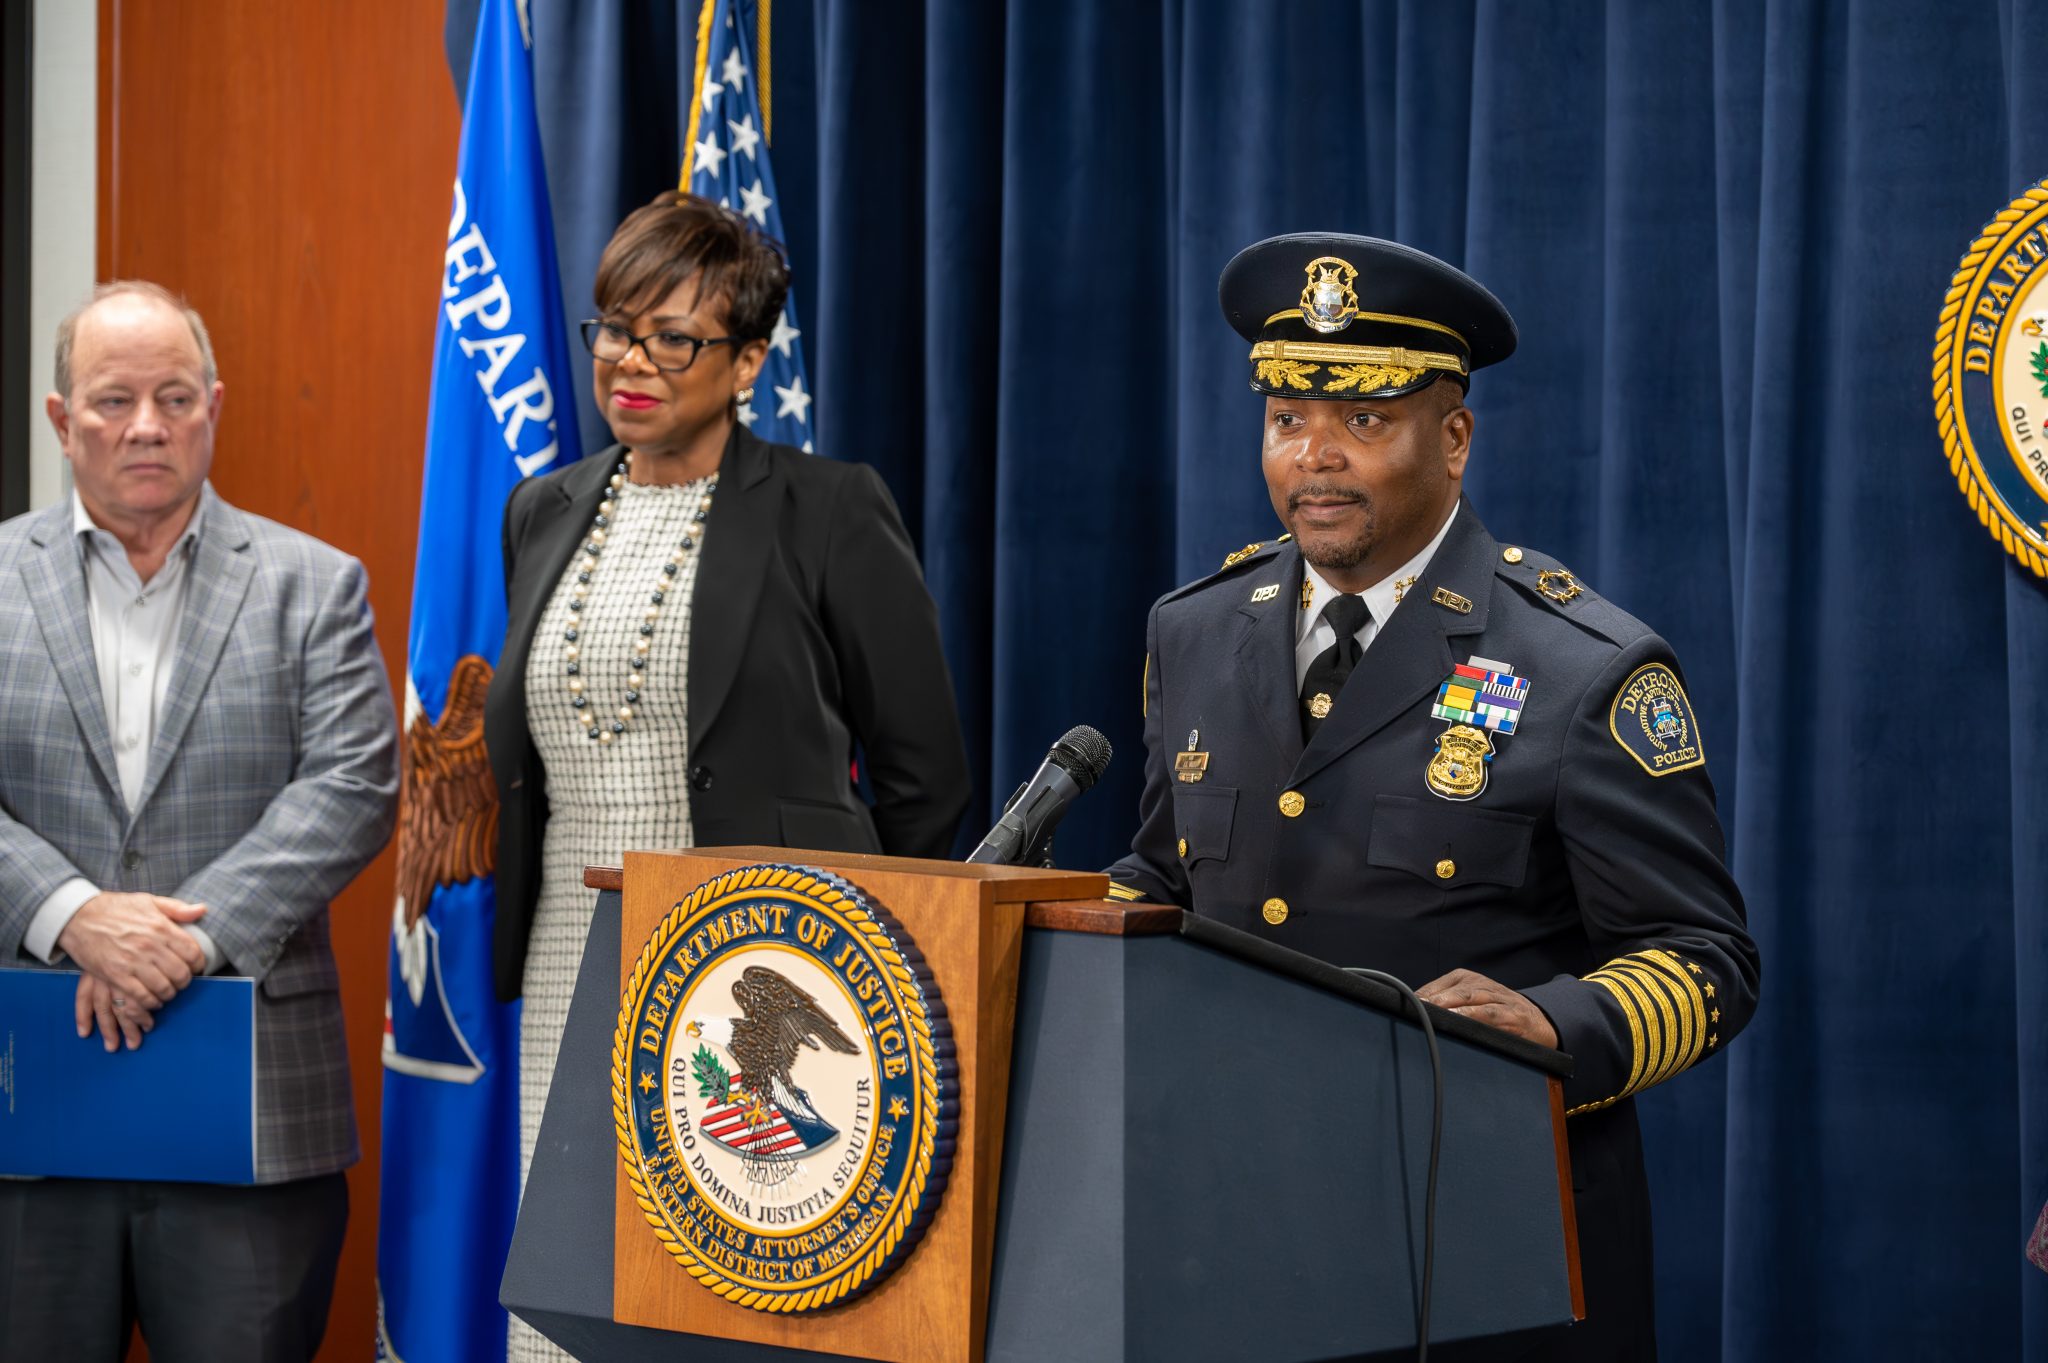 Detroit Police Chief James White speaks at a press conference discussing summer policing strategies for the city.